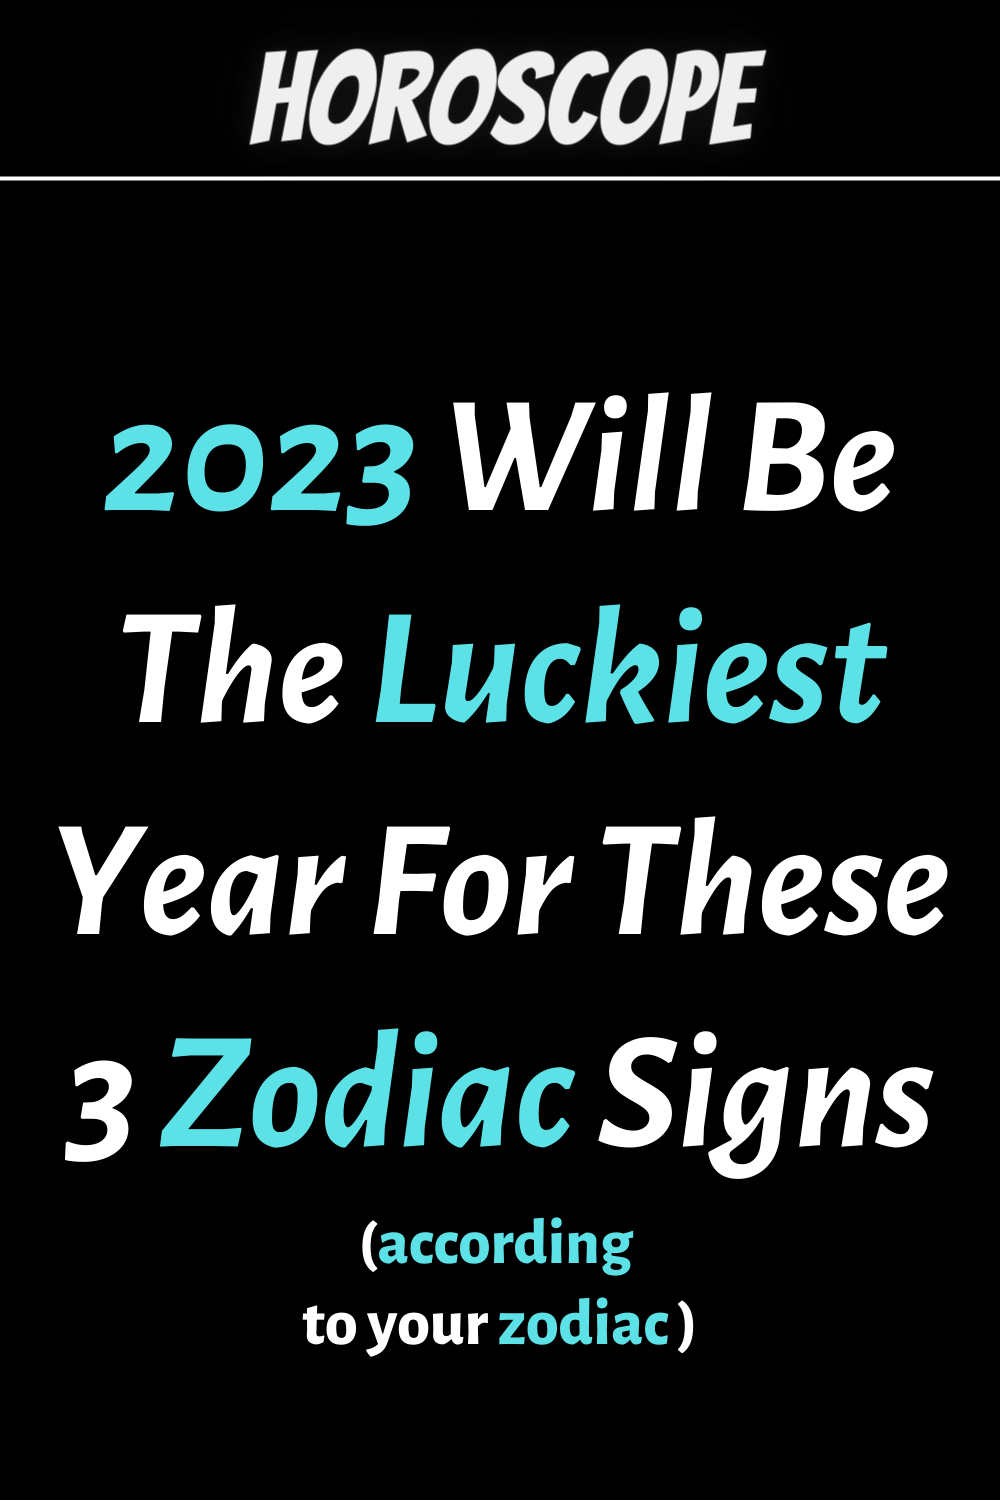 2023 Will Be The Luckiest Year For These 3 Zodiac Signs